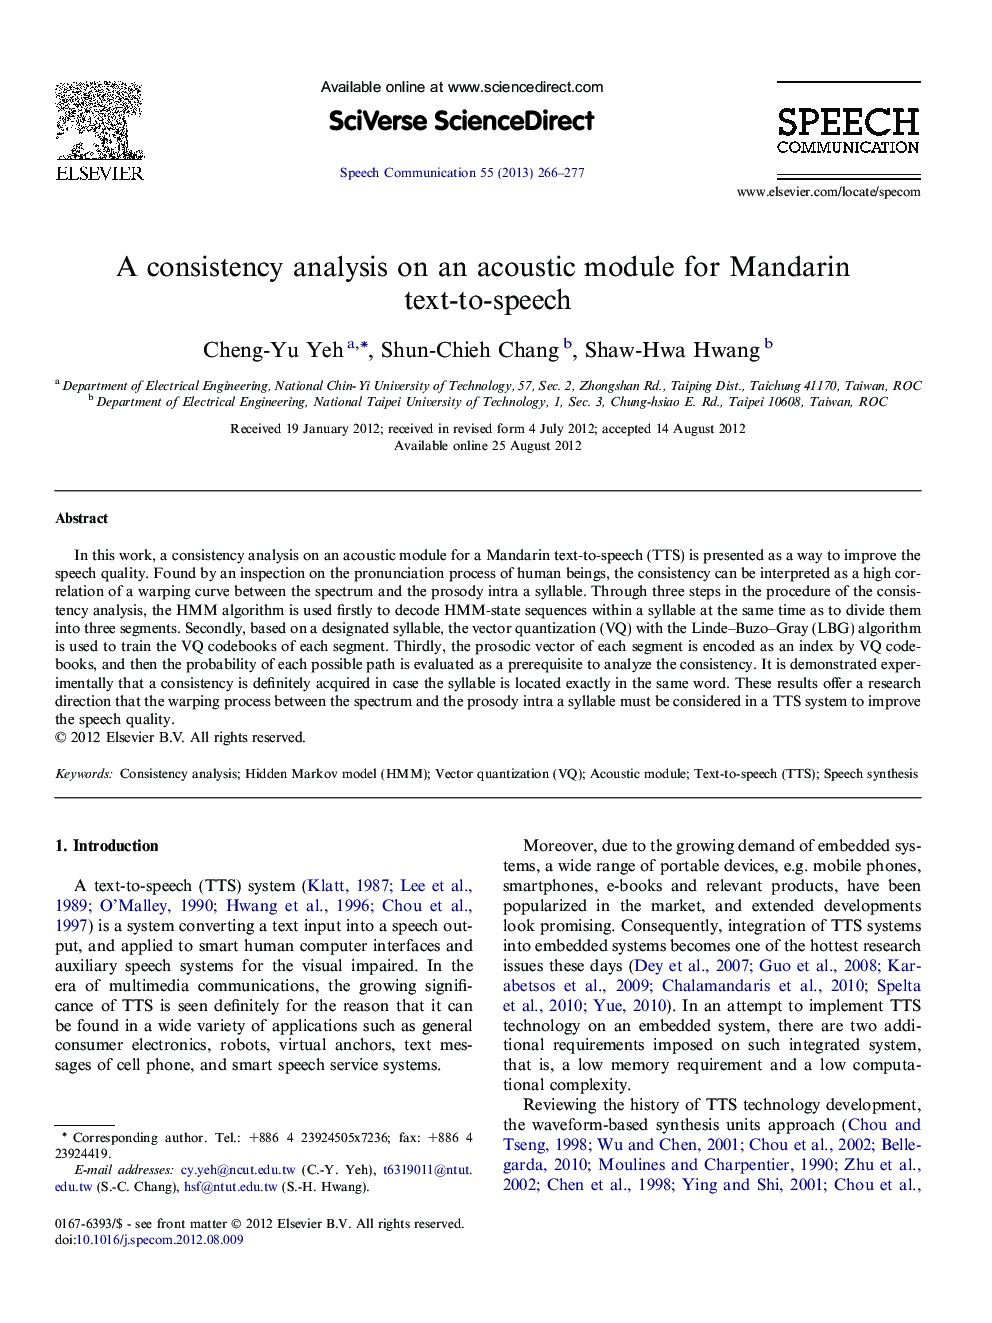 A consistency analysis on an acoustic module for Mandarin text-to-speech